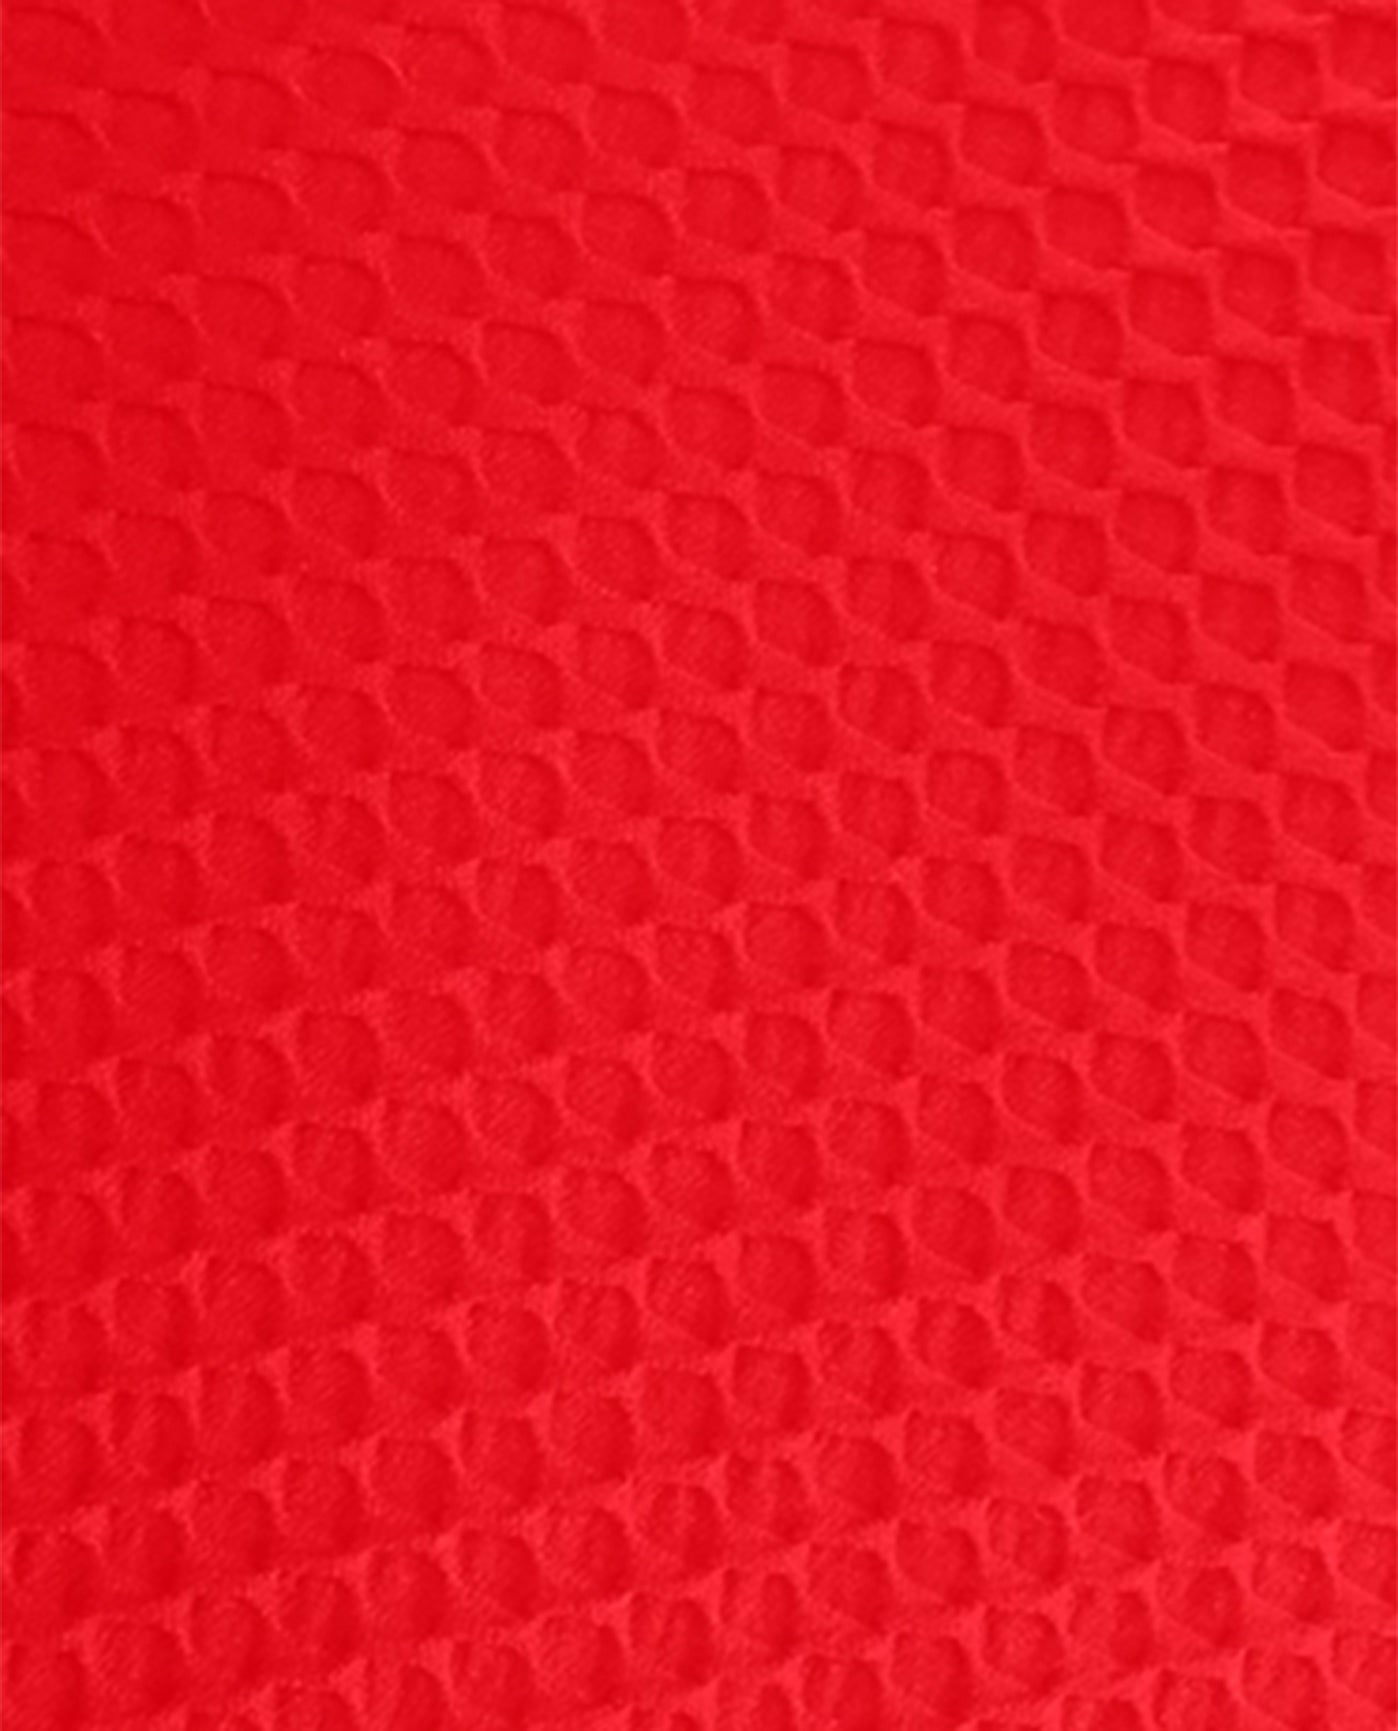 FABRIC SWATCH VIEW OF CHLORINE RESISTANT AQUAMORE SOLID TEXTURED SCOOP NECK PLUS SIZE LONG TORSO SWIMSUIT | 512 AQT TEXTURED SCARLET